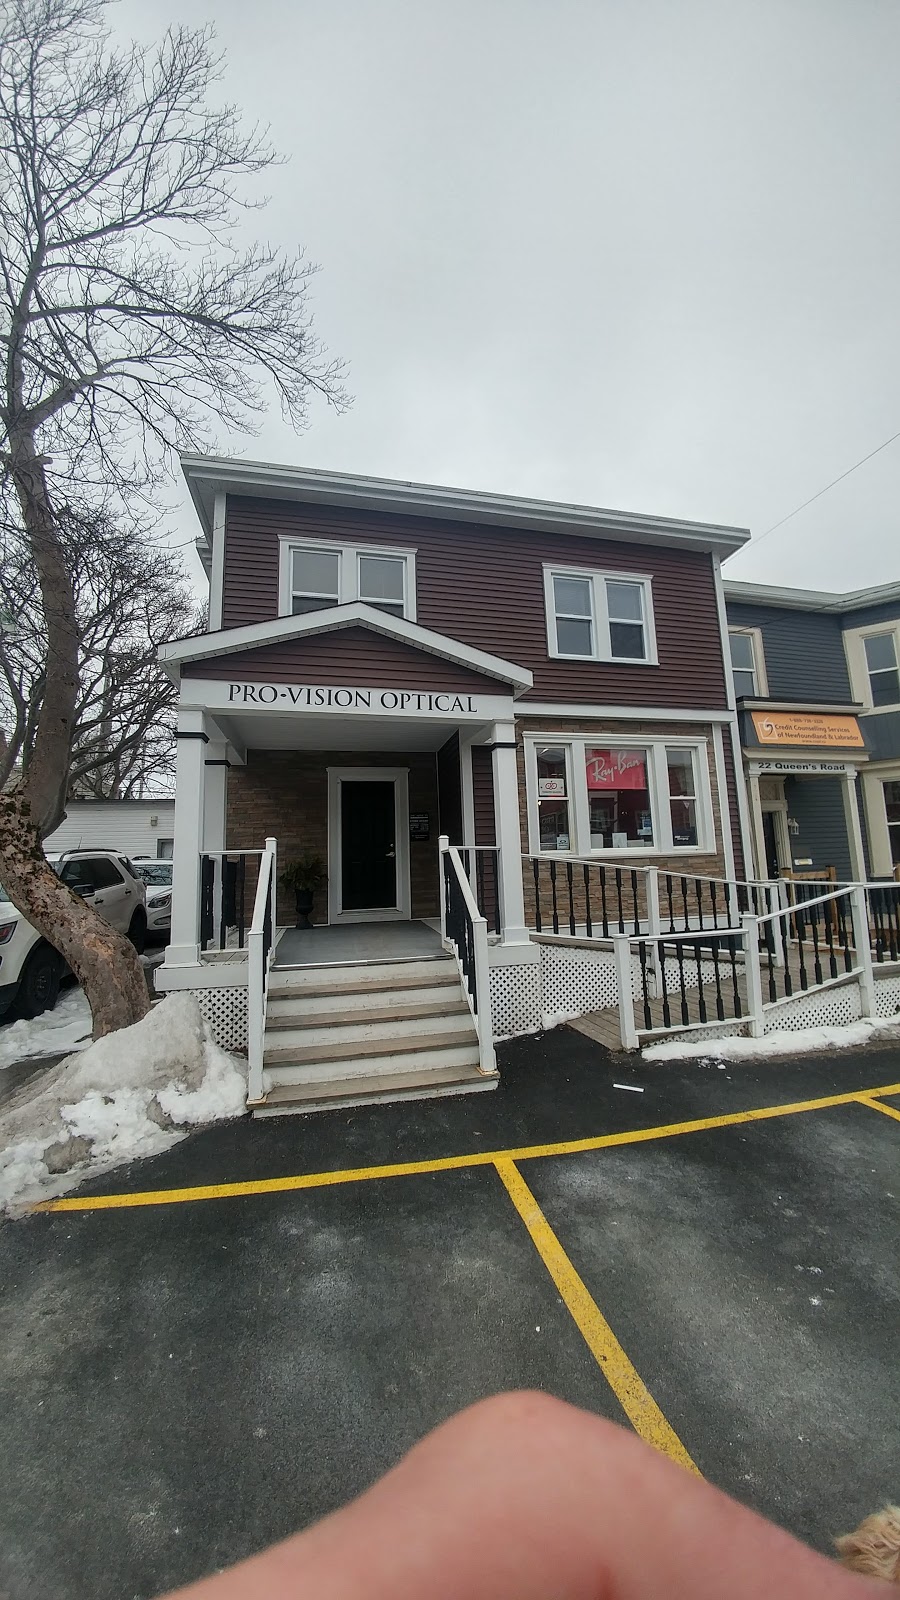 Pro-Vision Optical | health | 24 Queens Rd, St. Johns, NL A1C 2A5, Canada | 7095797360 OR +1 709-579-7360